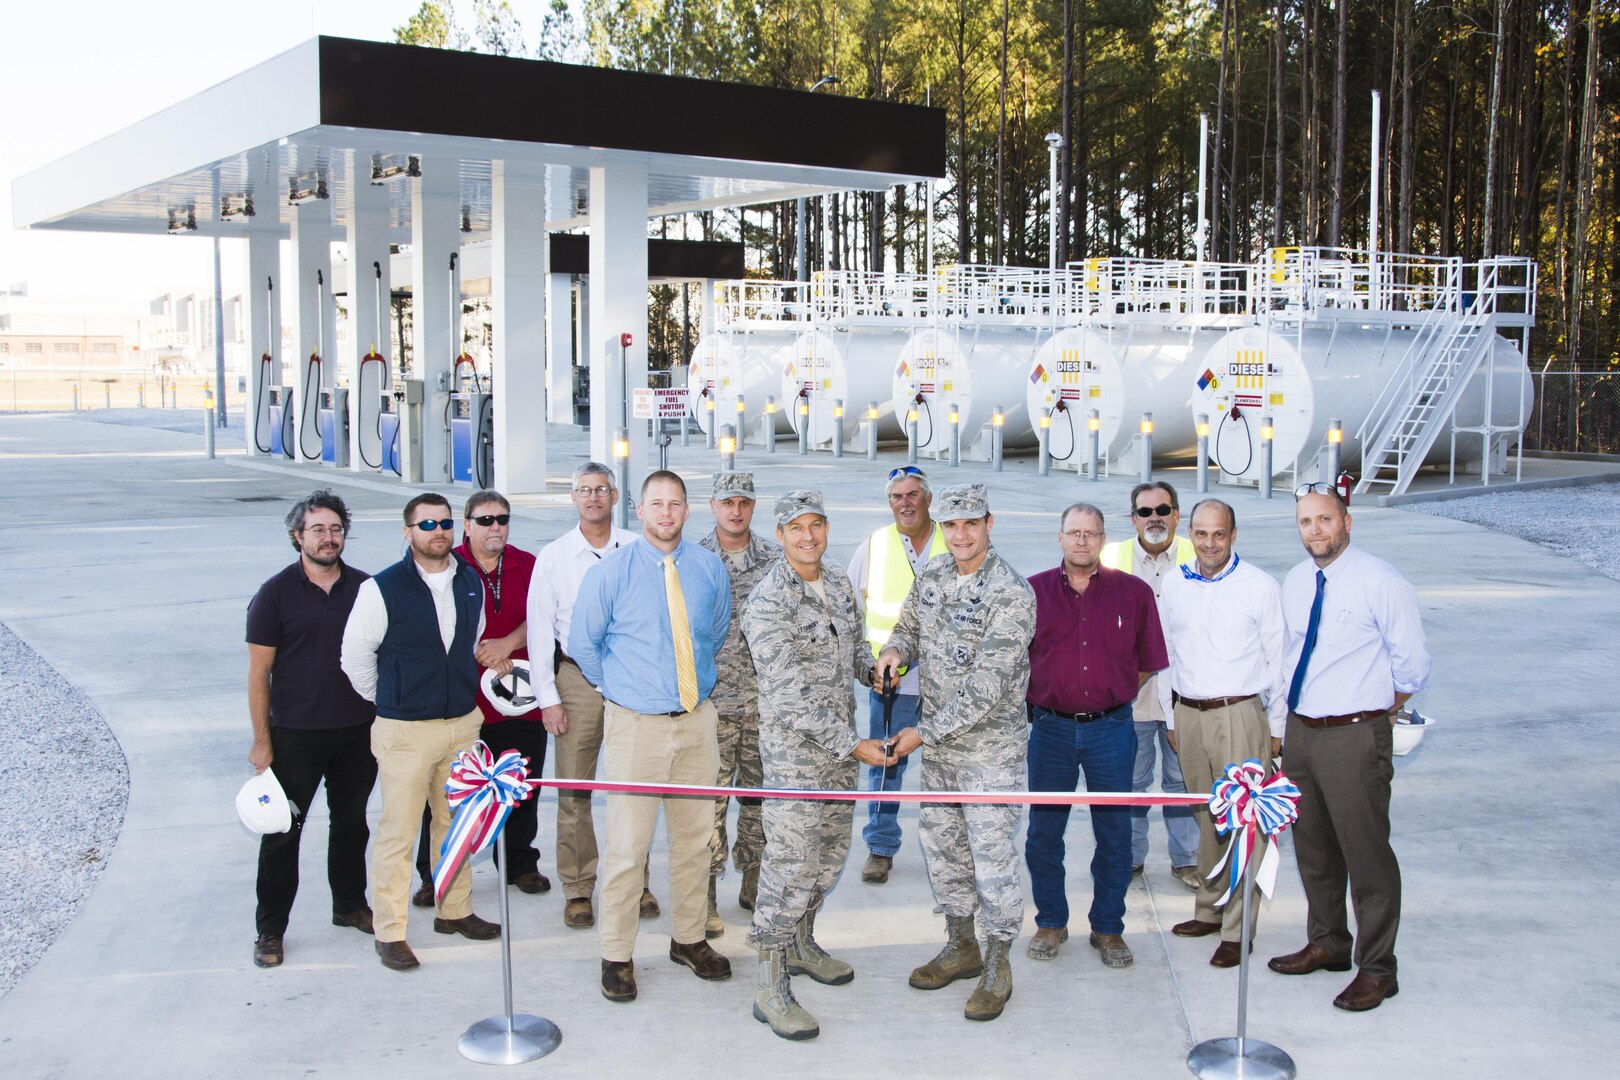 AEDC Test Support Division Chief Col. Eric Leshinsky (center left) and AEDC Commander Col. Rodney Todaro (center right) cut the ribbon during the Ribbon Cutting ceremony for the construction completion of the Arnold AFB Ground Vehicle Fueling Facility Nov. 16, 2016. The facility recently opened for business providing regular unleaded gasoline and diesel fuel for government vehicles at the Complex. Pictured with Leshinsky and Todaro are team members who worked on the project. (U.S. Air Force photo/Rick Goodfriend)